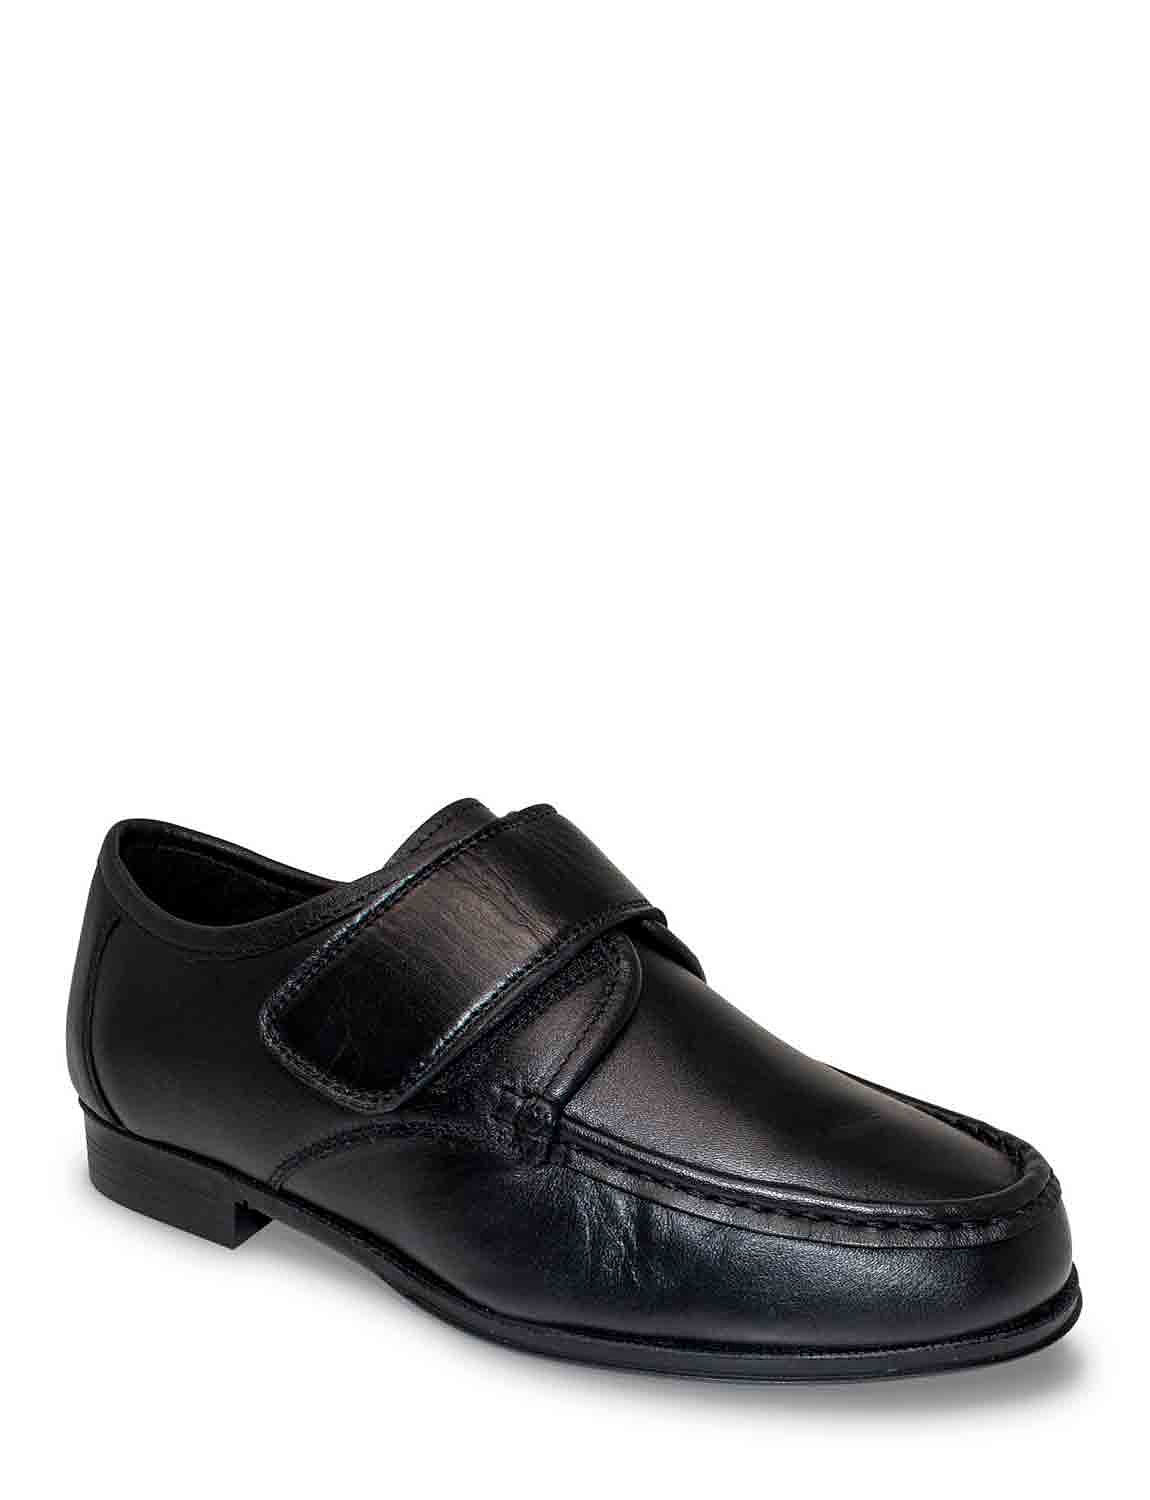 Mens Leather Wide Opening Touch Fasten Shoe